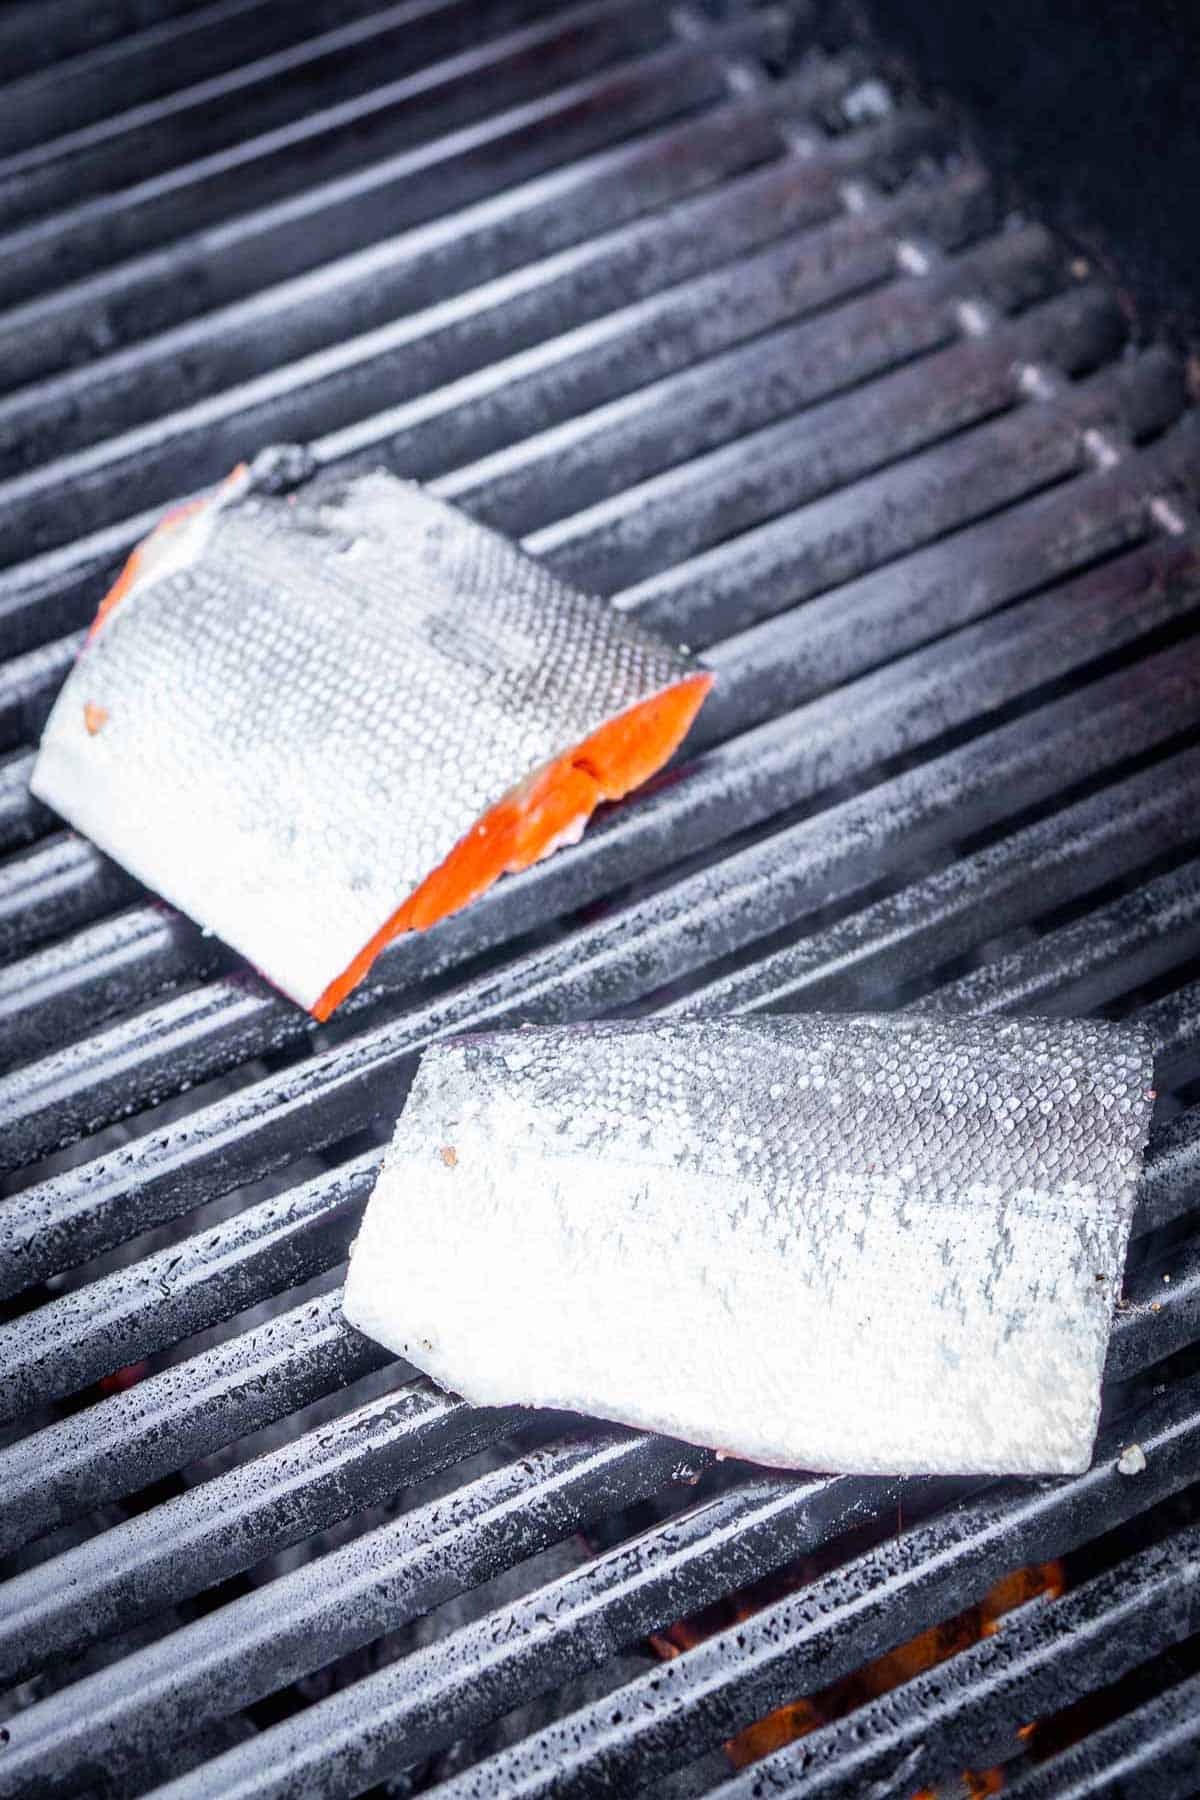 salmon is face down on grill with skin side up